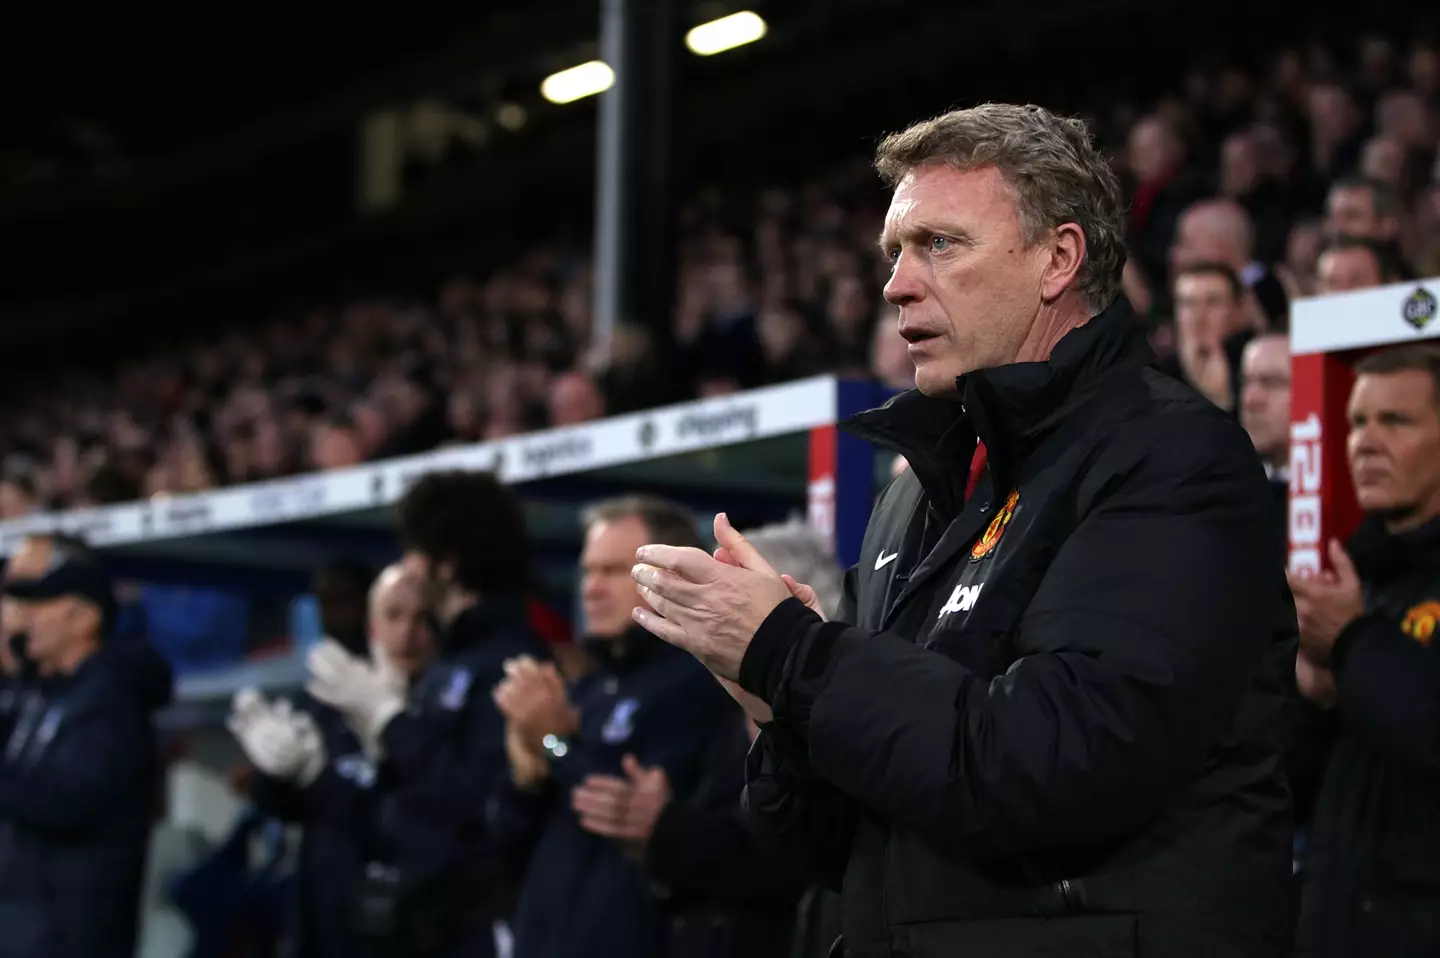 David Moyes’ reign at Manchester United only lasted 10 months after succeeding Sir Alex Ferguson.